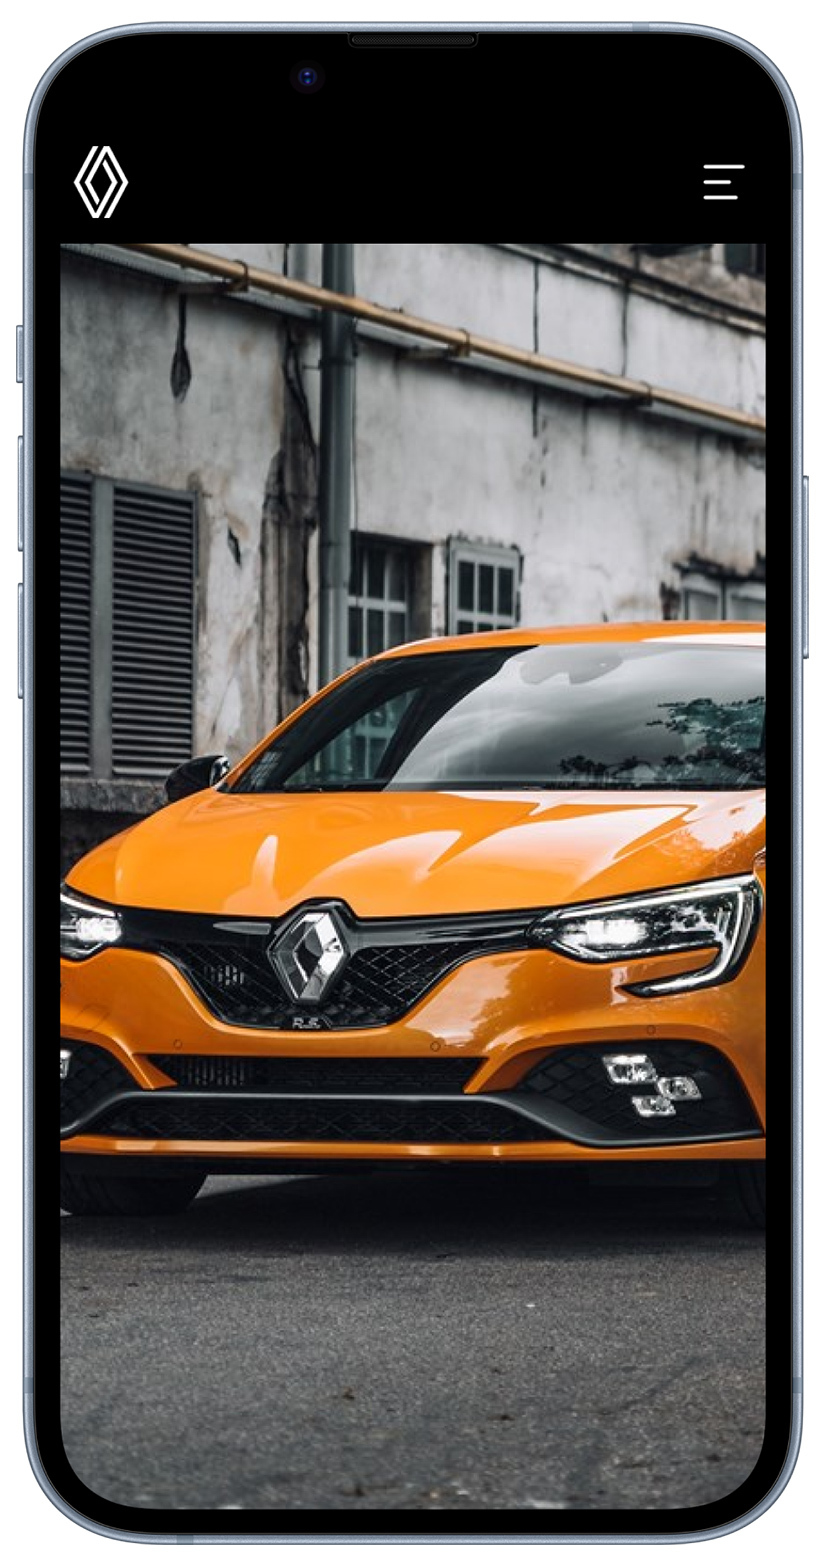 renault project image